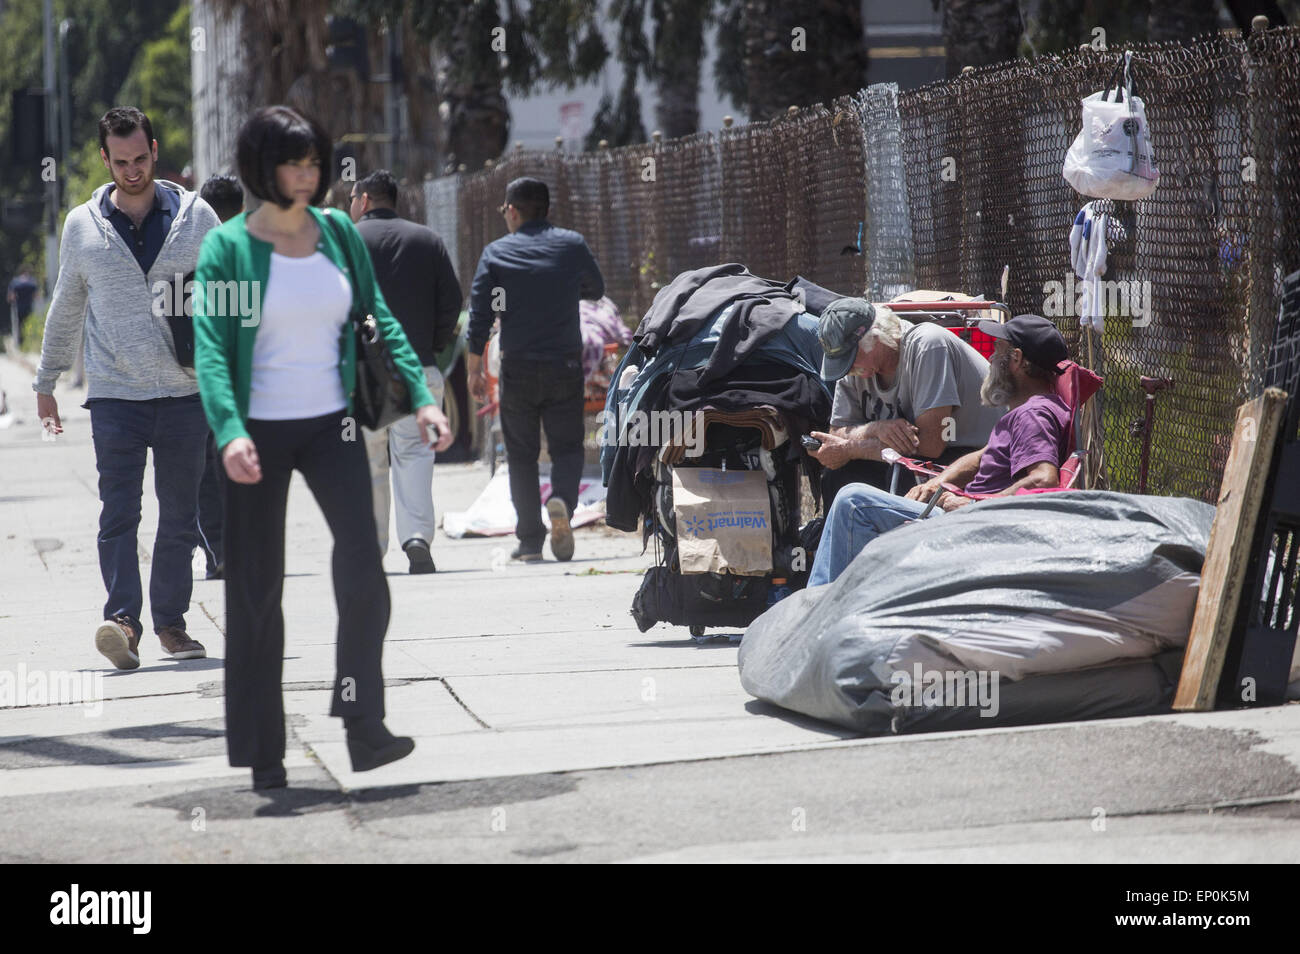 Los Angeles California Usa 12th May 15 Homeless People Are Seen In Downtown Los Angeles On May 12 15 The Number Of Homeless People Living In A Vast Swath Of Los Angeles